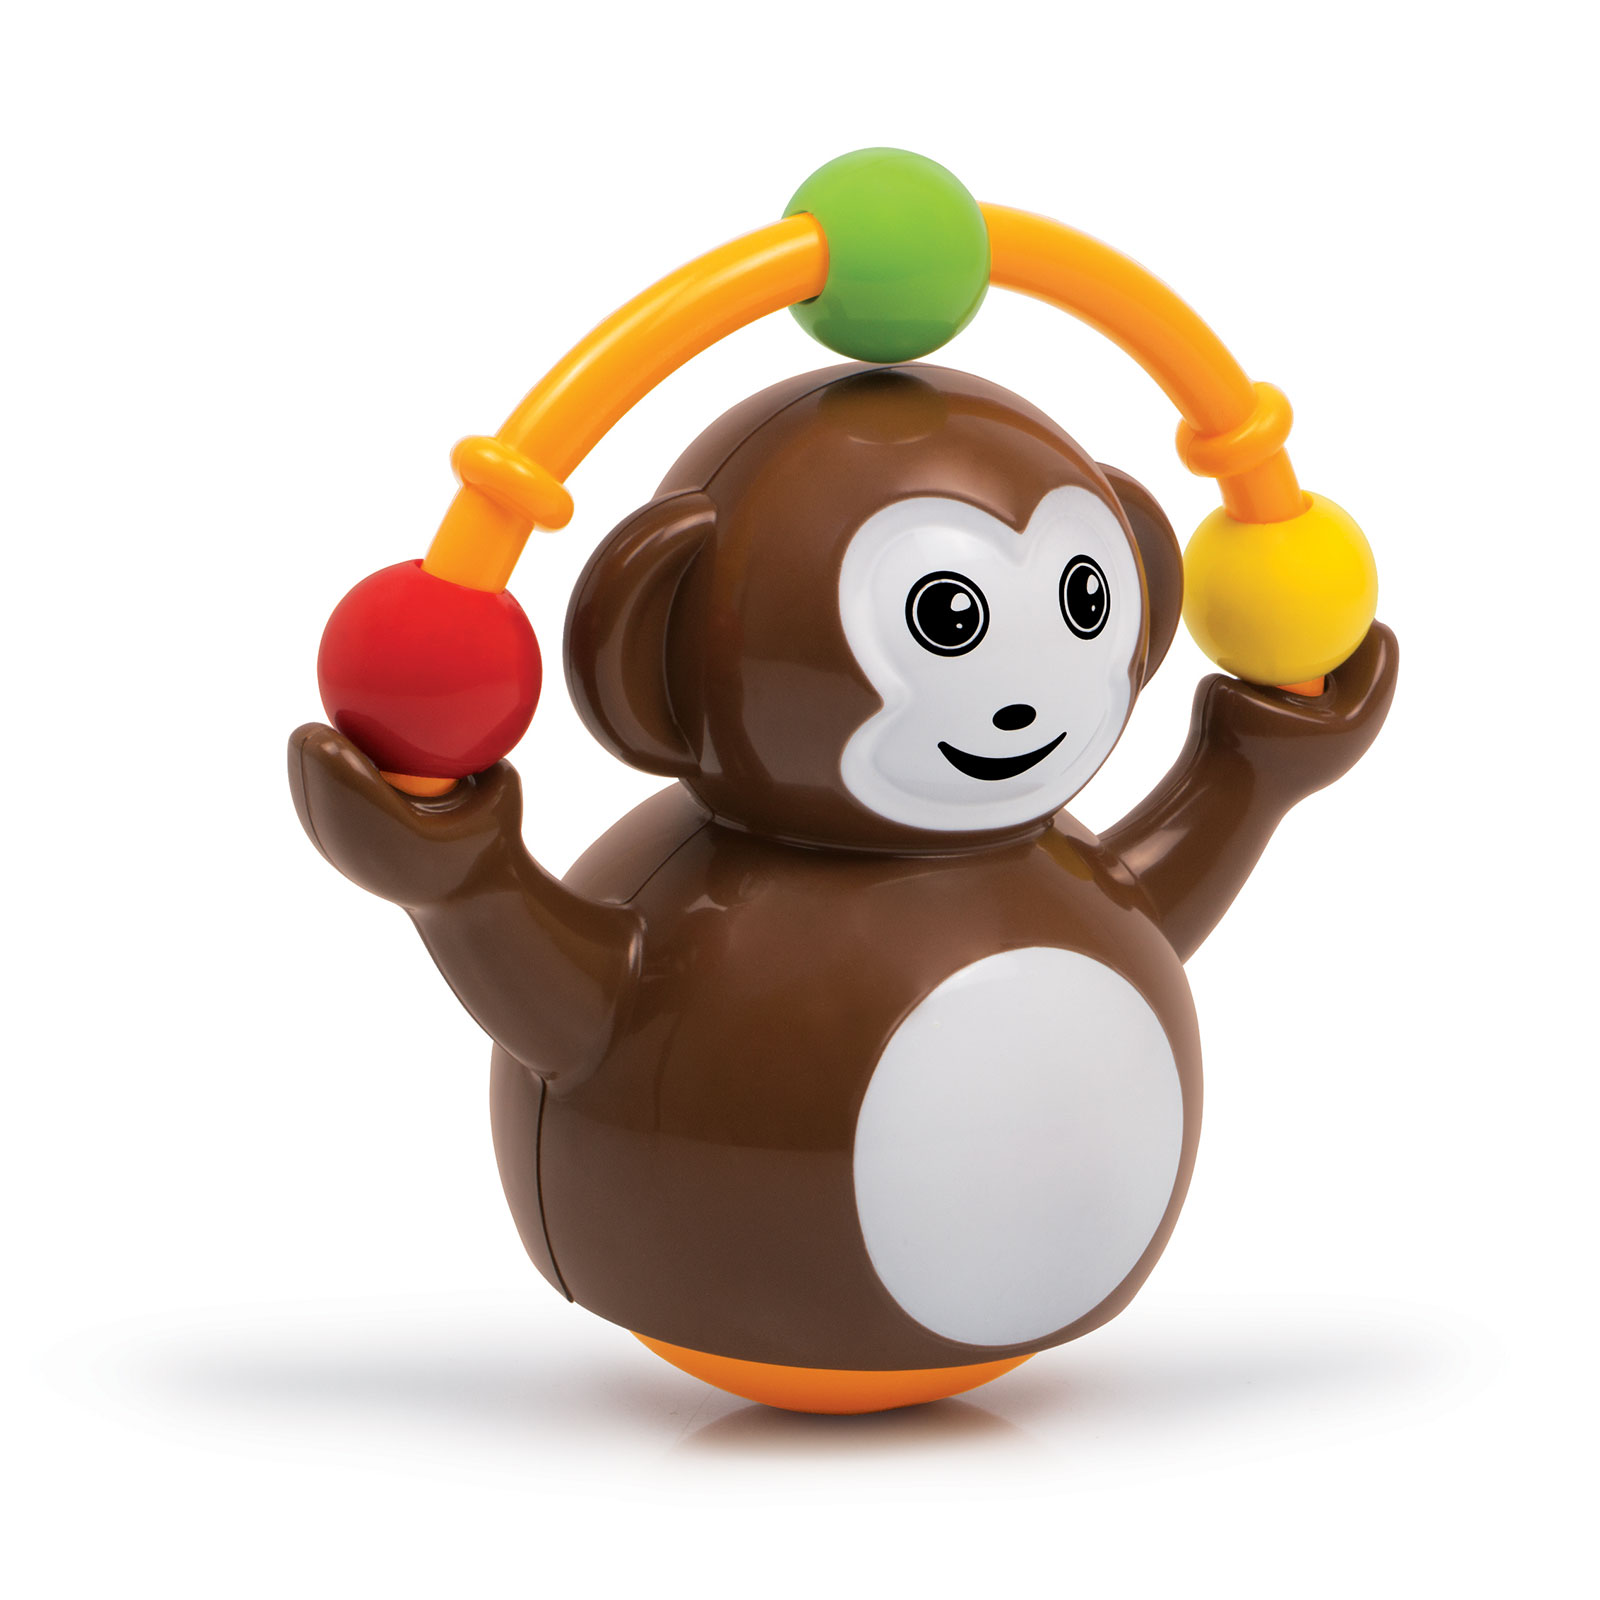 3 Years Details about   Multicolor Push and Crawl Monkey From Funskool For Kids Age 6 Months 